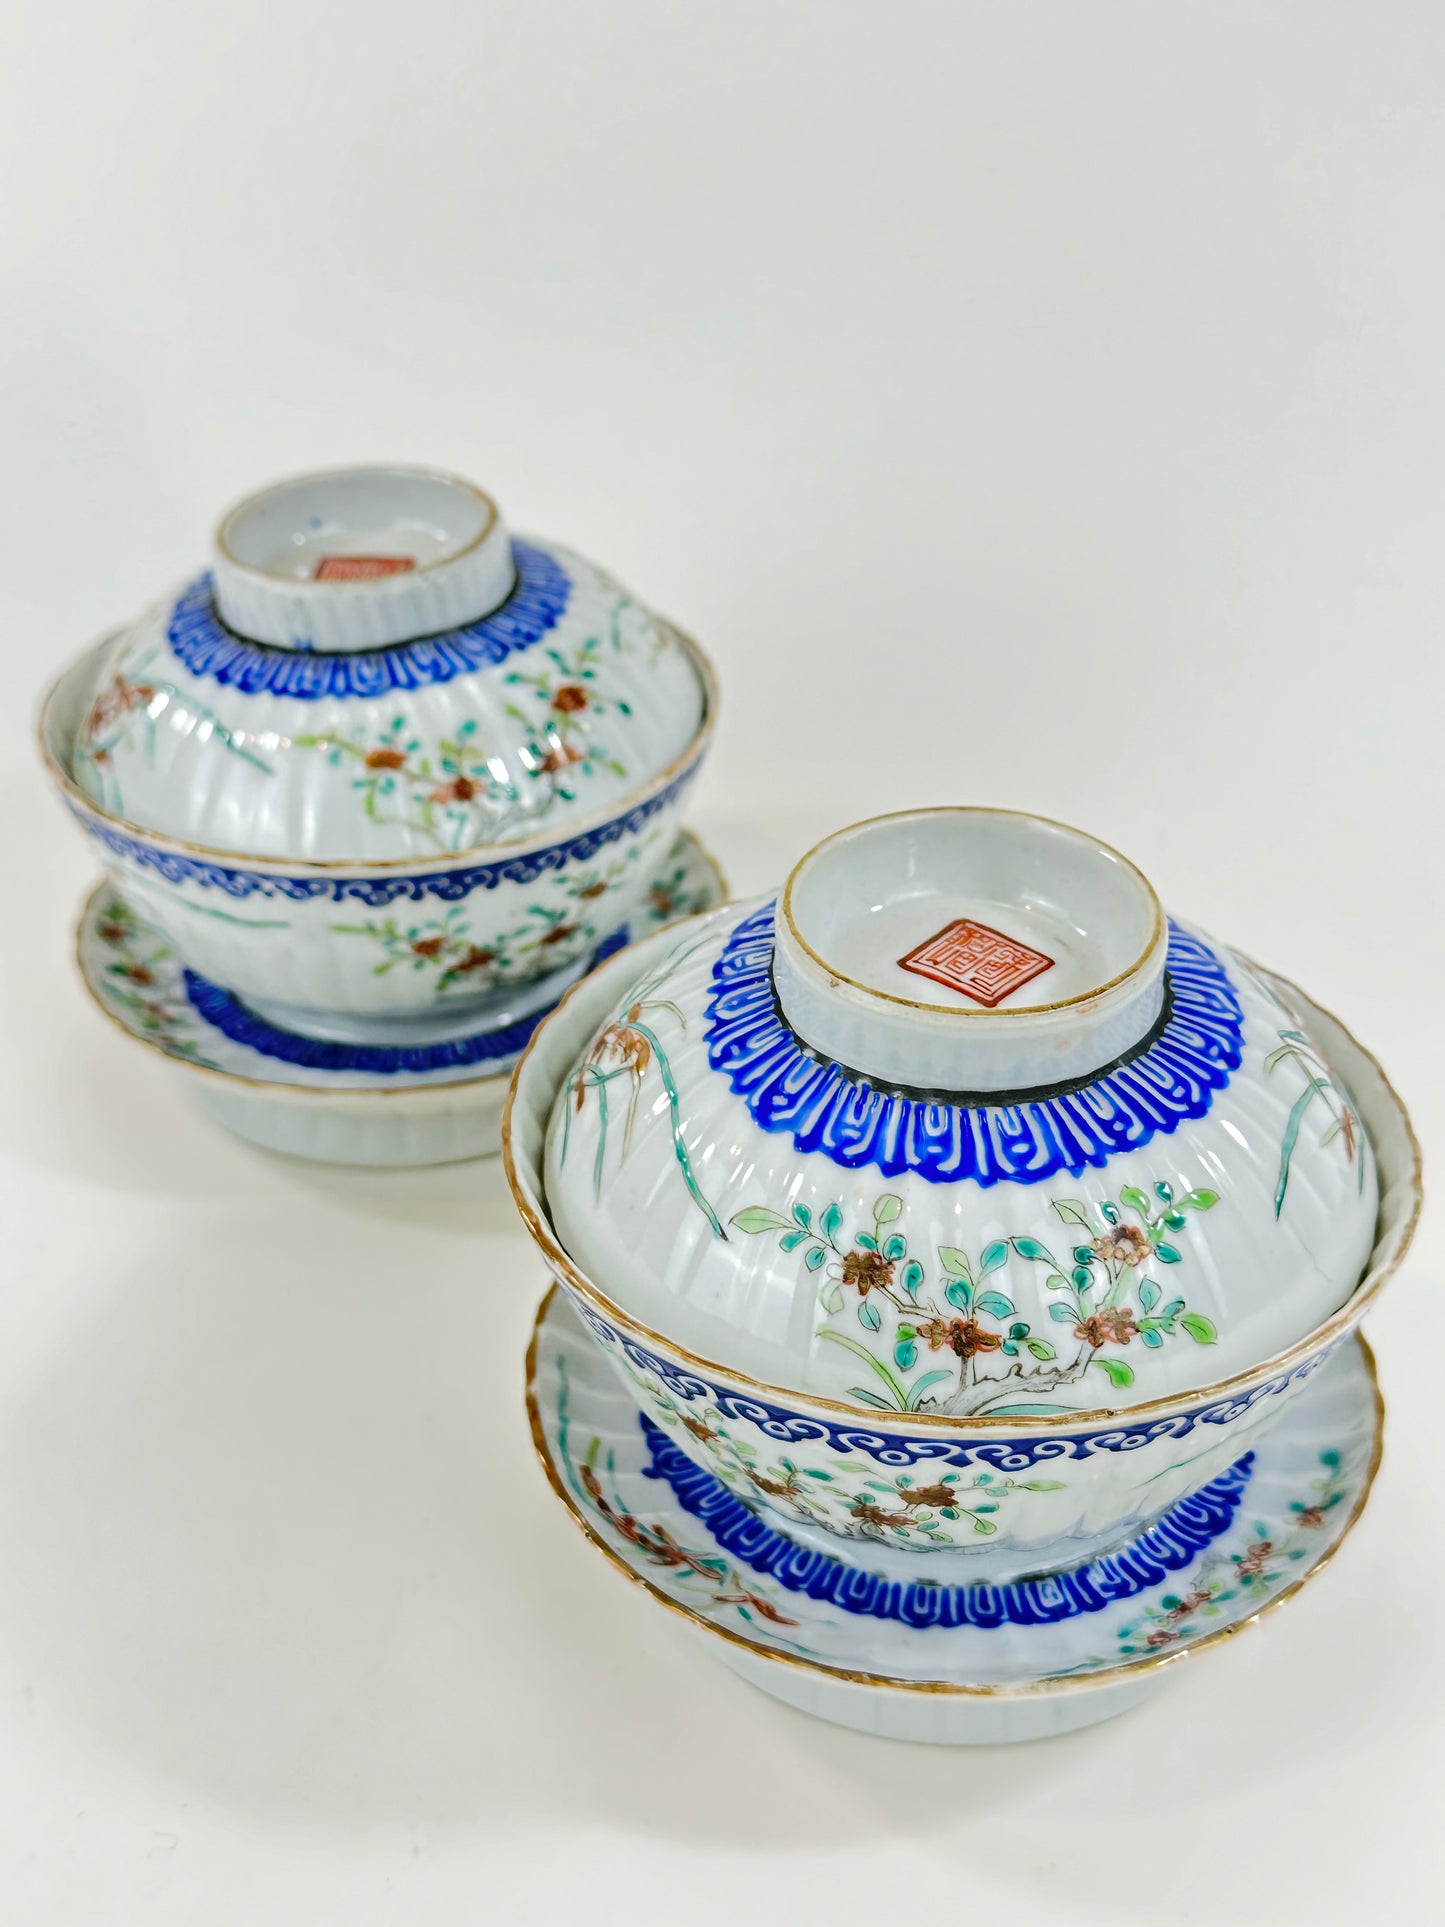 Antique Chinese Pair of Gaiwan Tea Cups c1910/20's Blue & White